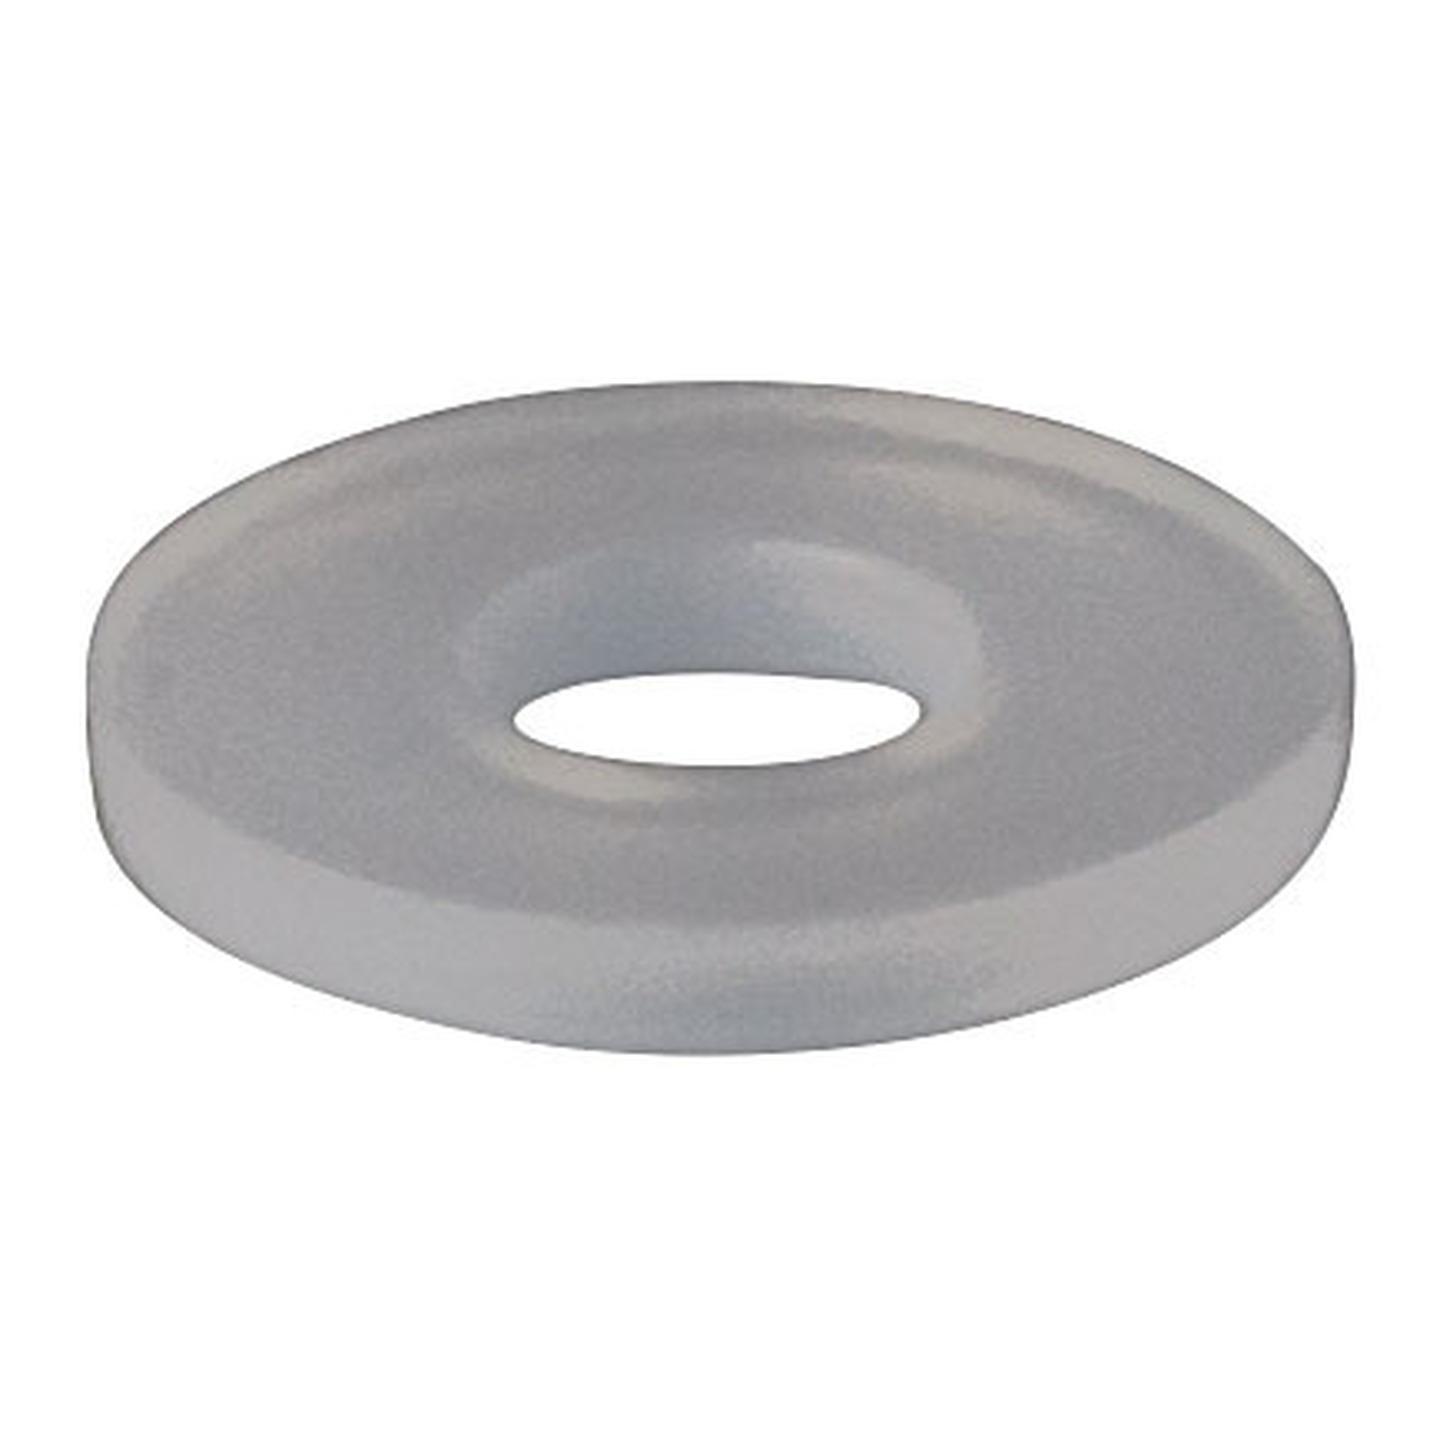 3mm Nylon Washers - Pack of 10